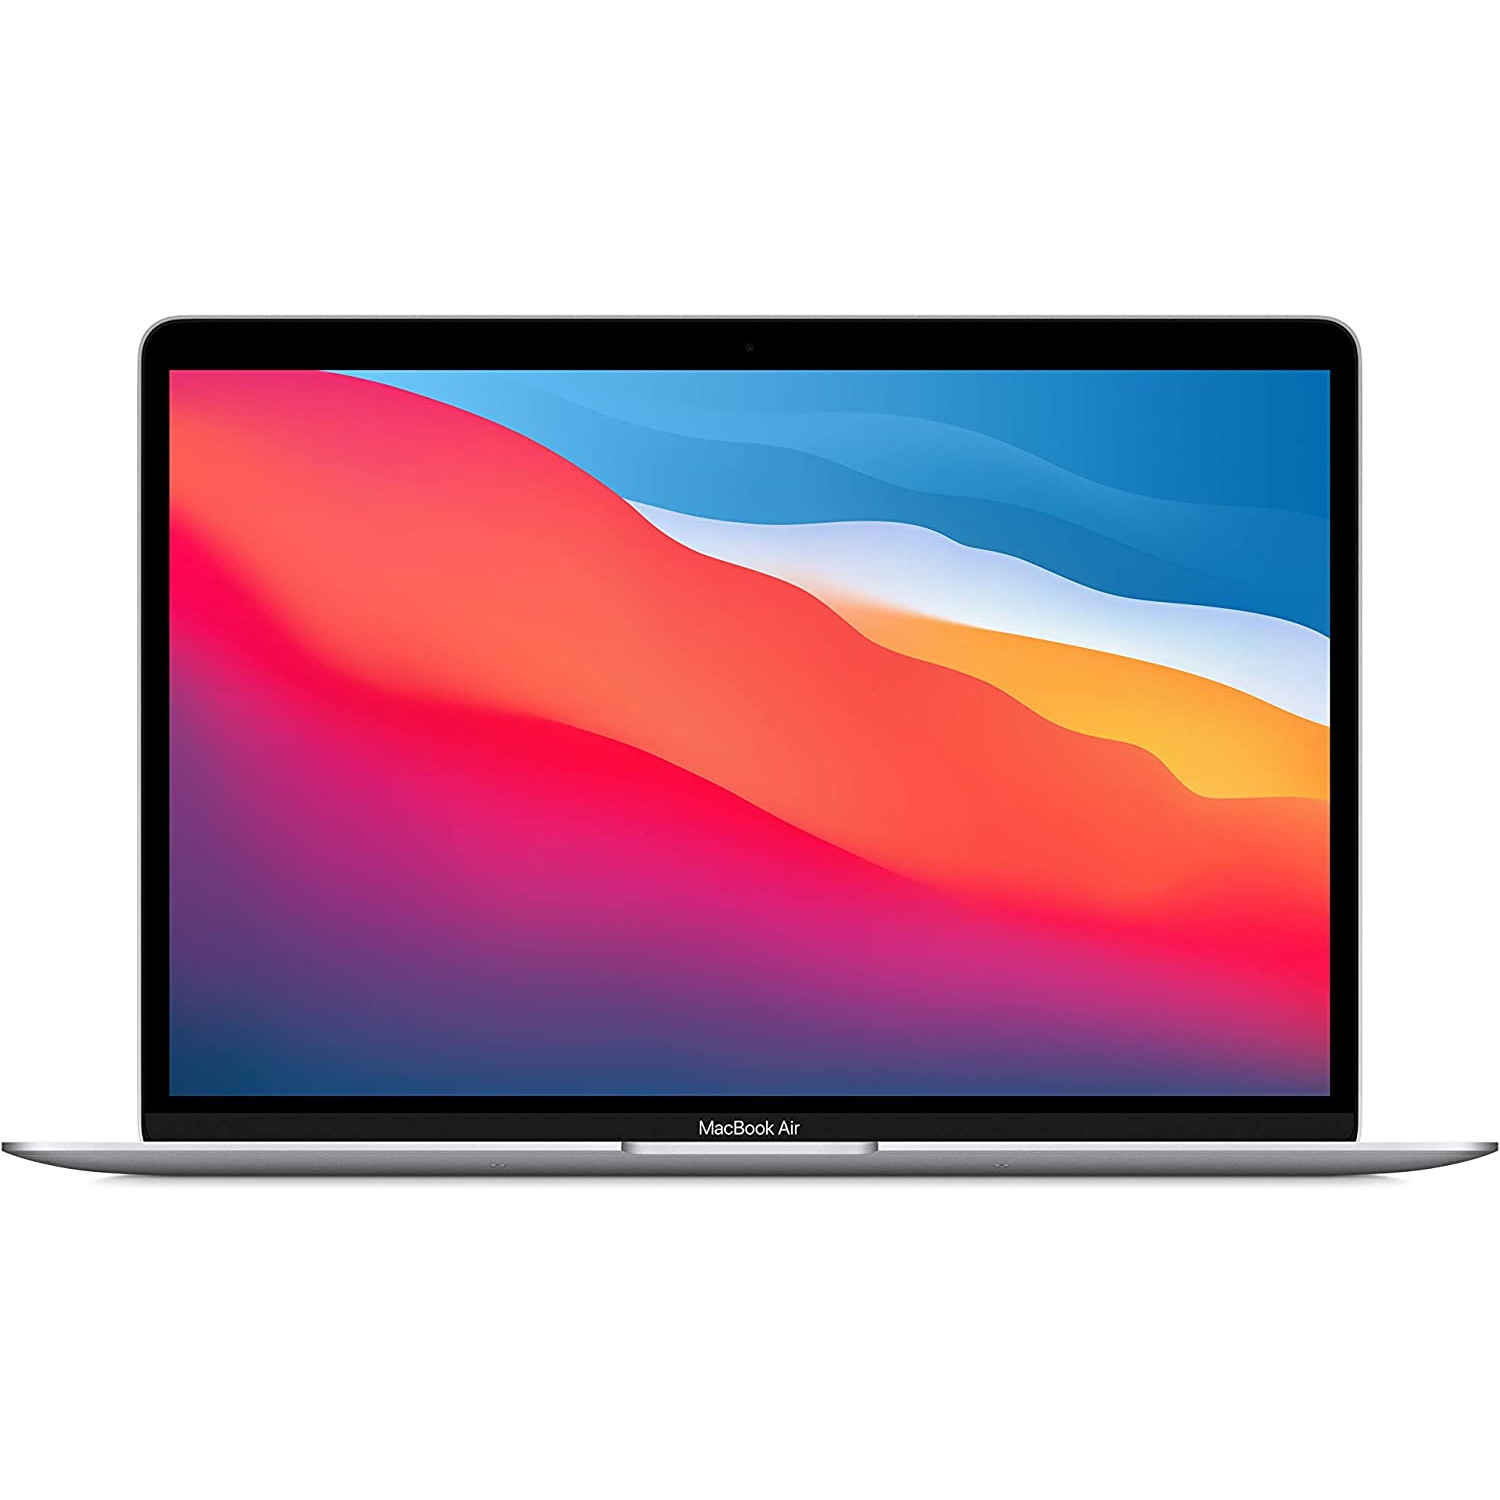 Be quick! New MacBook Air M1 is back in stock for $100 off ahead of Cyber Monday